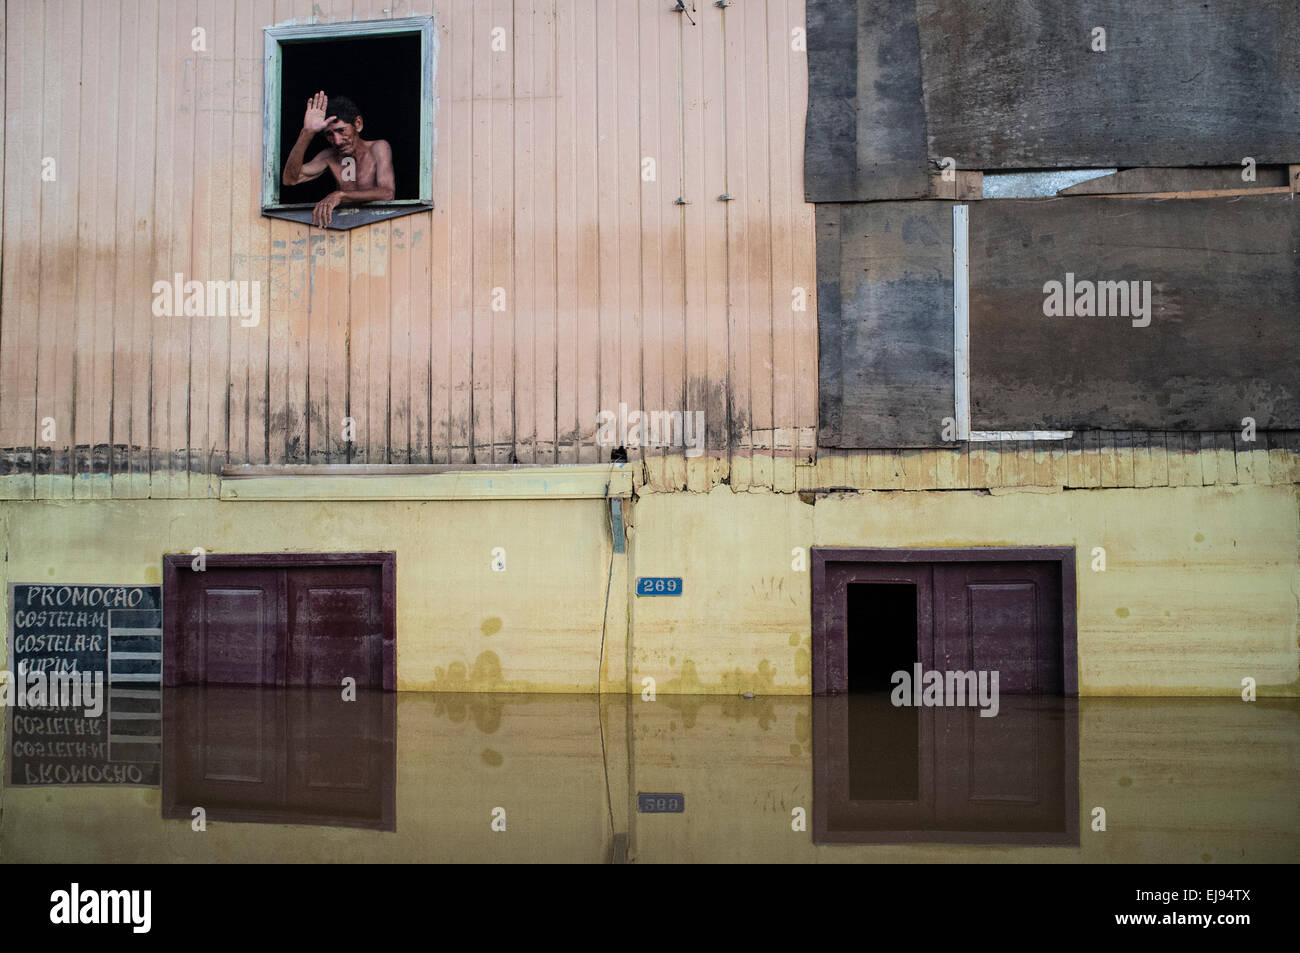 2015 flooding in Brazilian Amazon, Joao Pereira de Araujo in the second floor of his flooded house at Triangulo Novo district, Rio Branco city, Acre State. One can see the flood line - brown mark in the pink house just below the window. Floods have been affecting thousands of people in the state of Acre, northern Brazil, since 23 February 2015, when some of the state’s rivers, in particular the Acre river, overflowed. Stock Photo